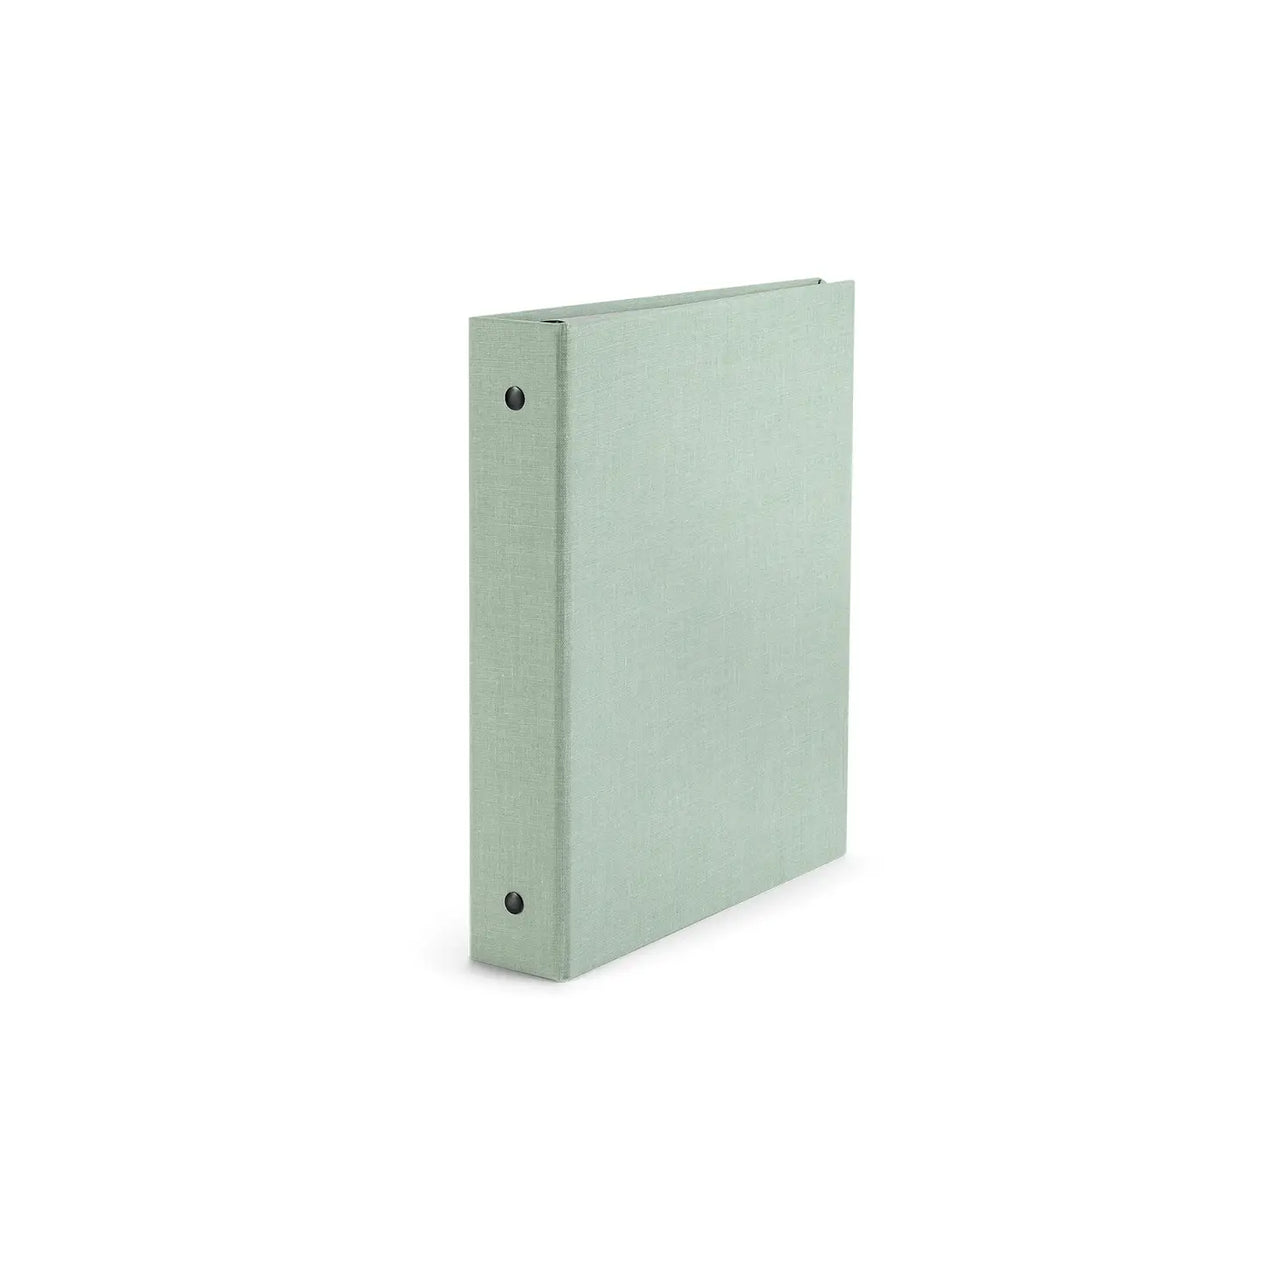 2023 Compact Binder Planner - Mineral Green